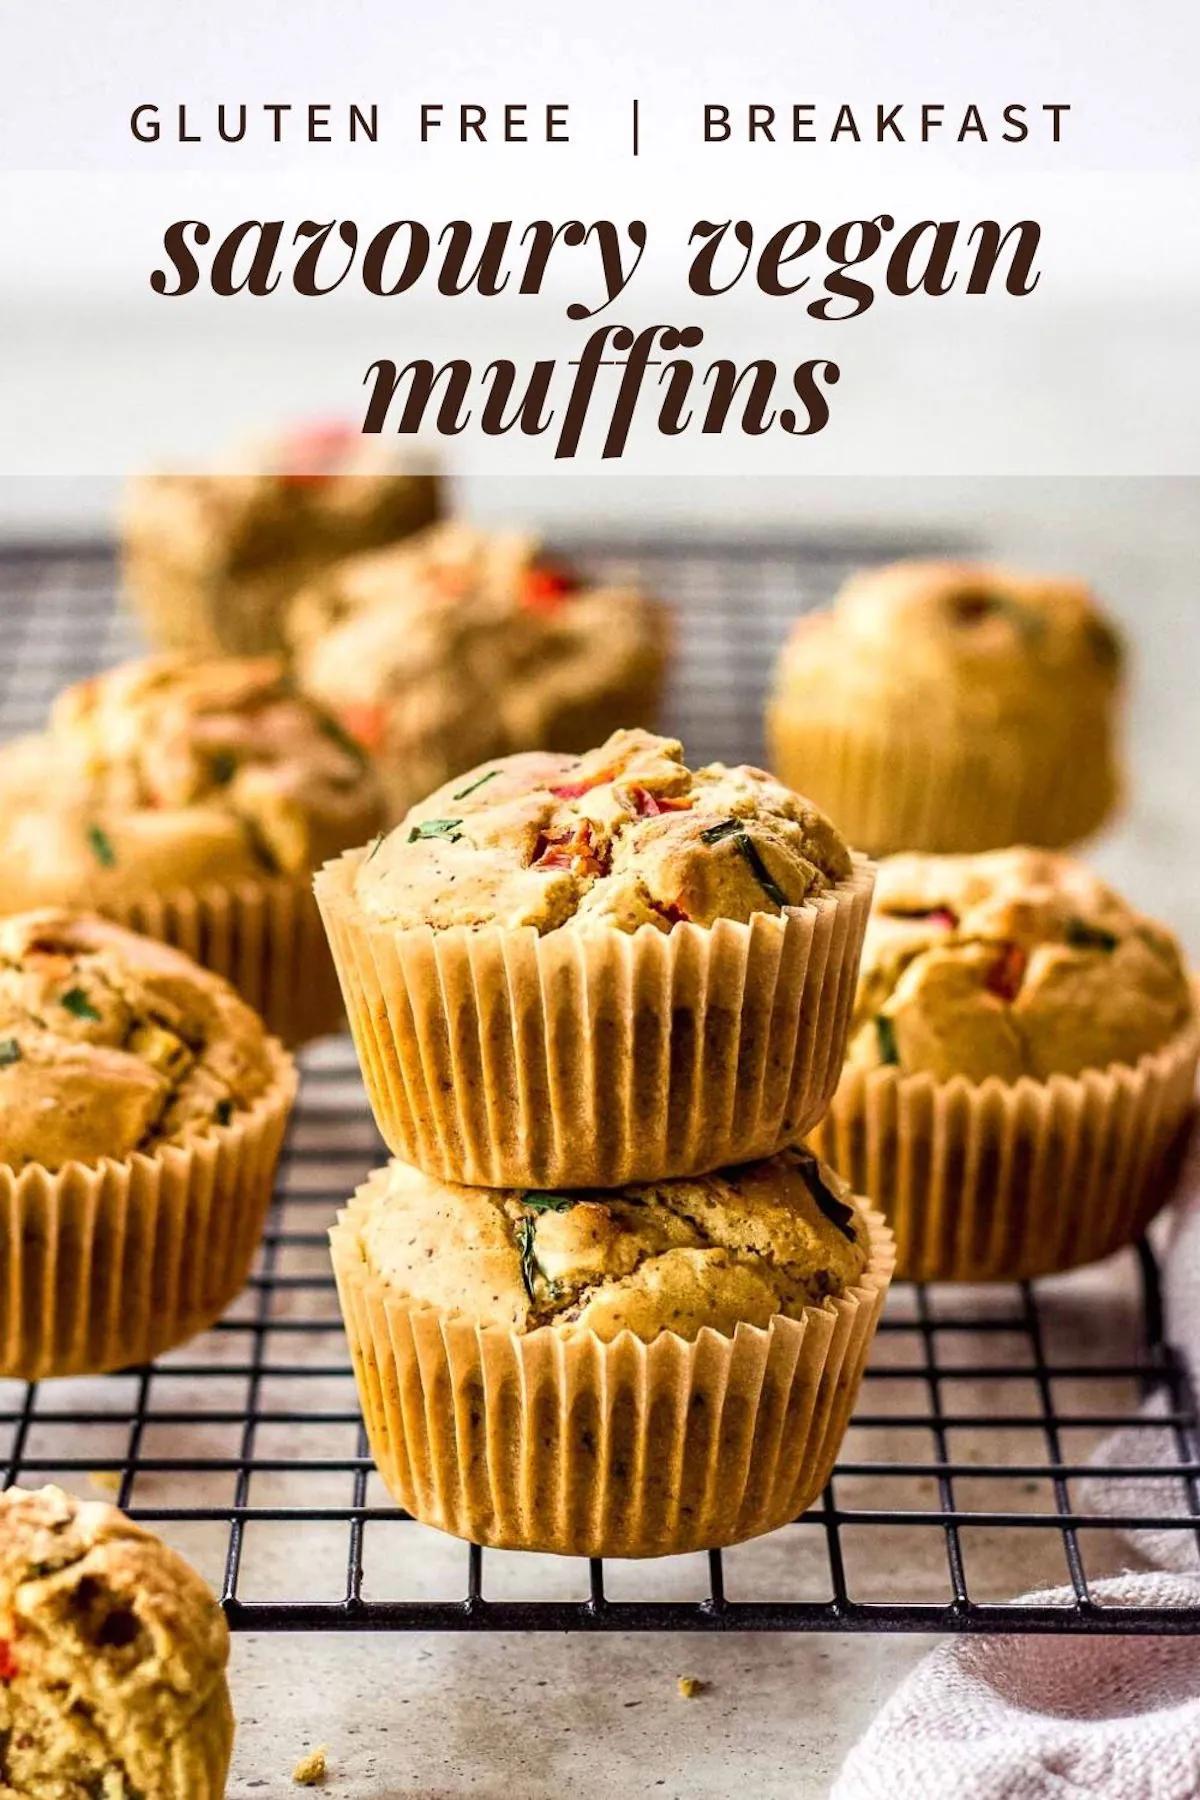 Looking for a quick vegan breakfast? These gluten free savoury muffins are easy to make and totally customizable. They're a great kids packed lunch idea too.